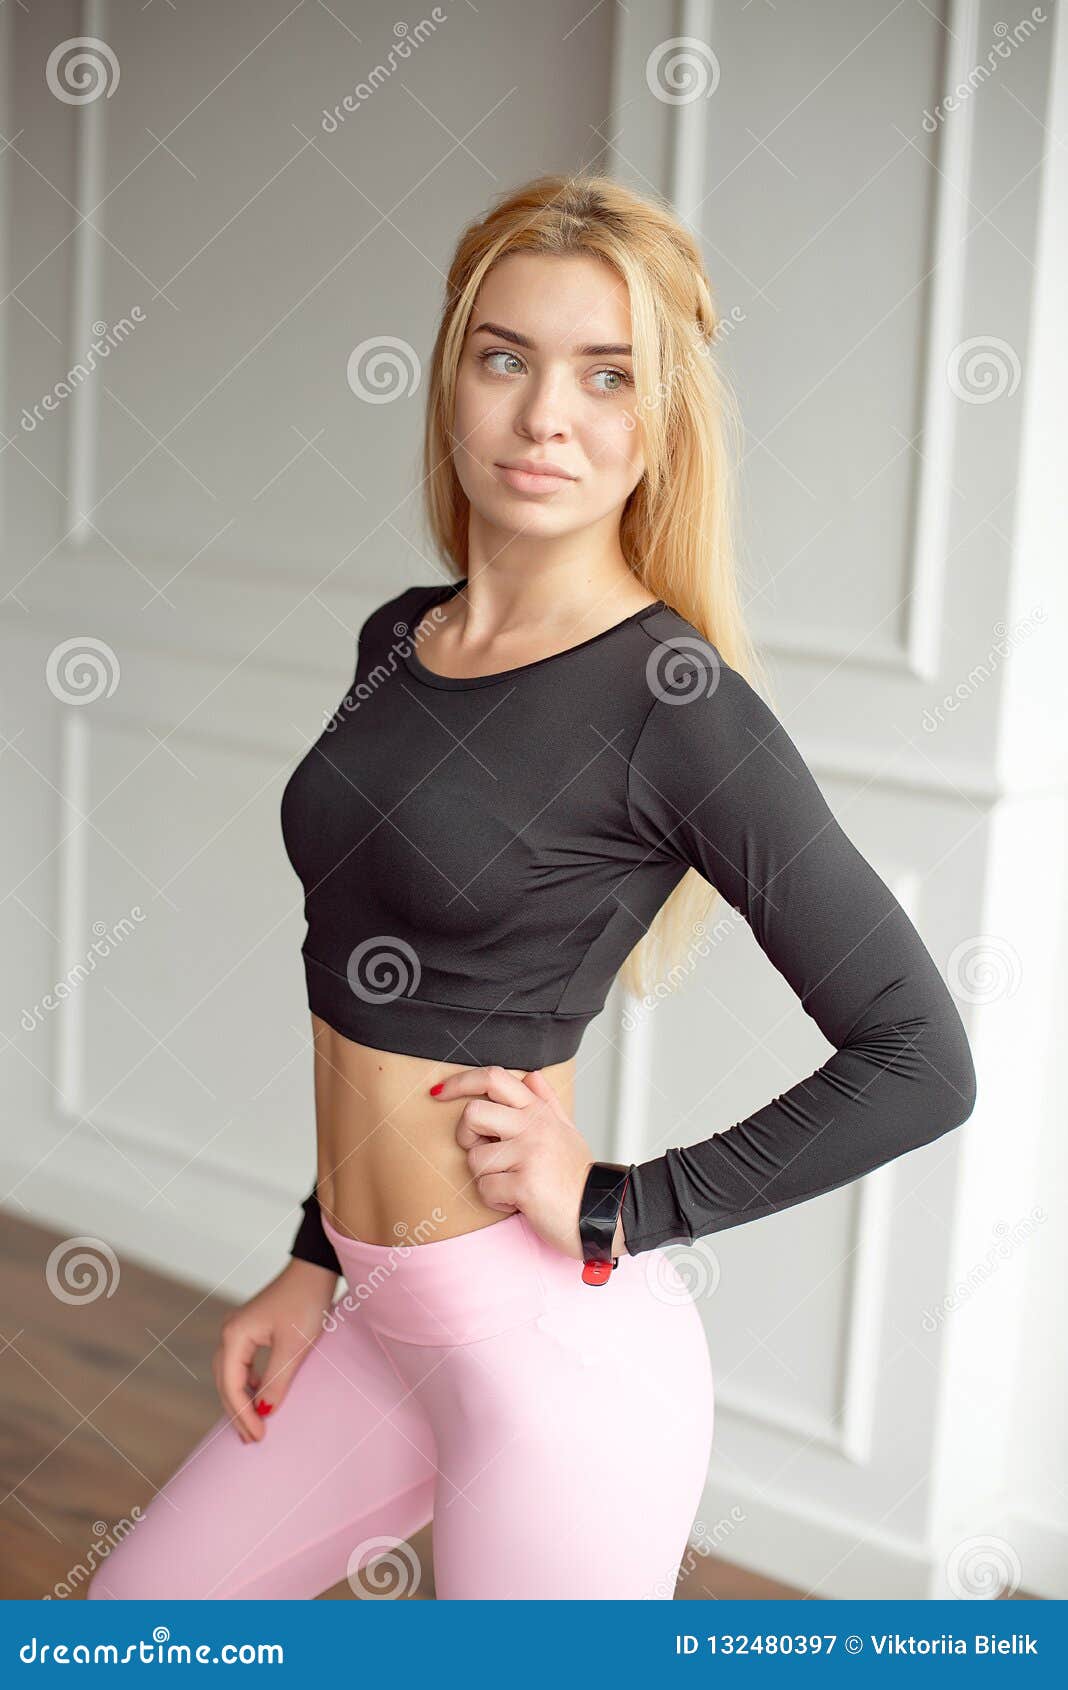 Young Slim Woman with an Athletic Body Long Blonde Hair Wearing in Black  Sports Sportswear Top and Pink Leggings Stock Image - Image of exercise,  sporty: 132480397